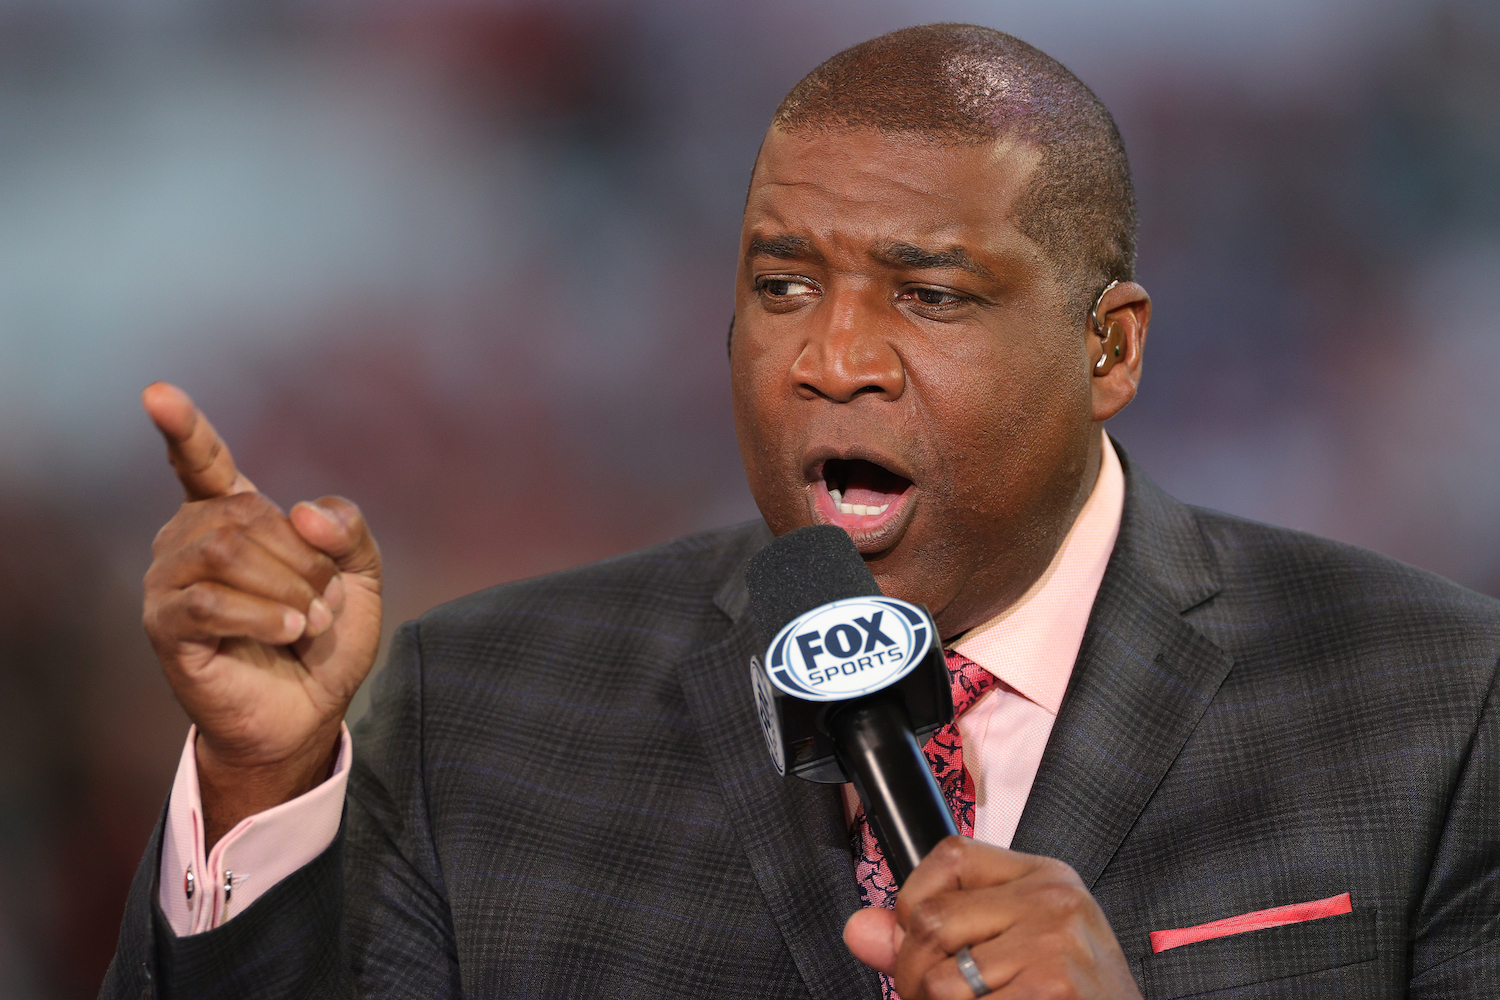 Fox Sports’ Curt Menefee and Howie Long Call BS on NFL’s Response After Dez Bryant’s Last-Minute Positive Test